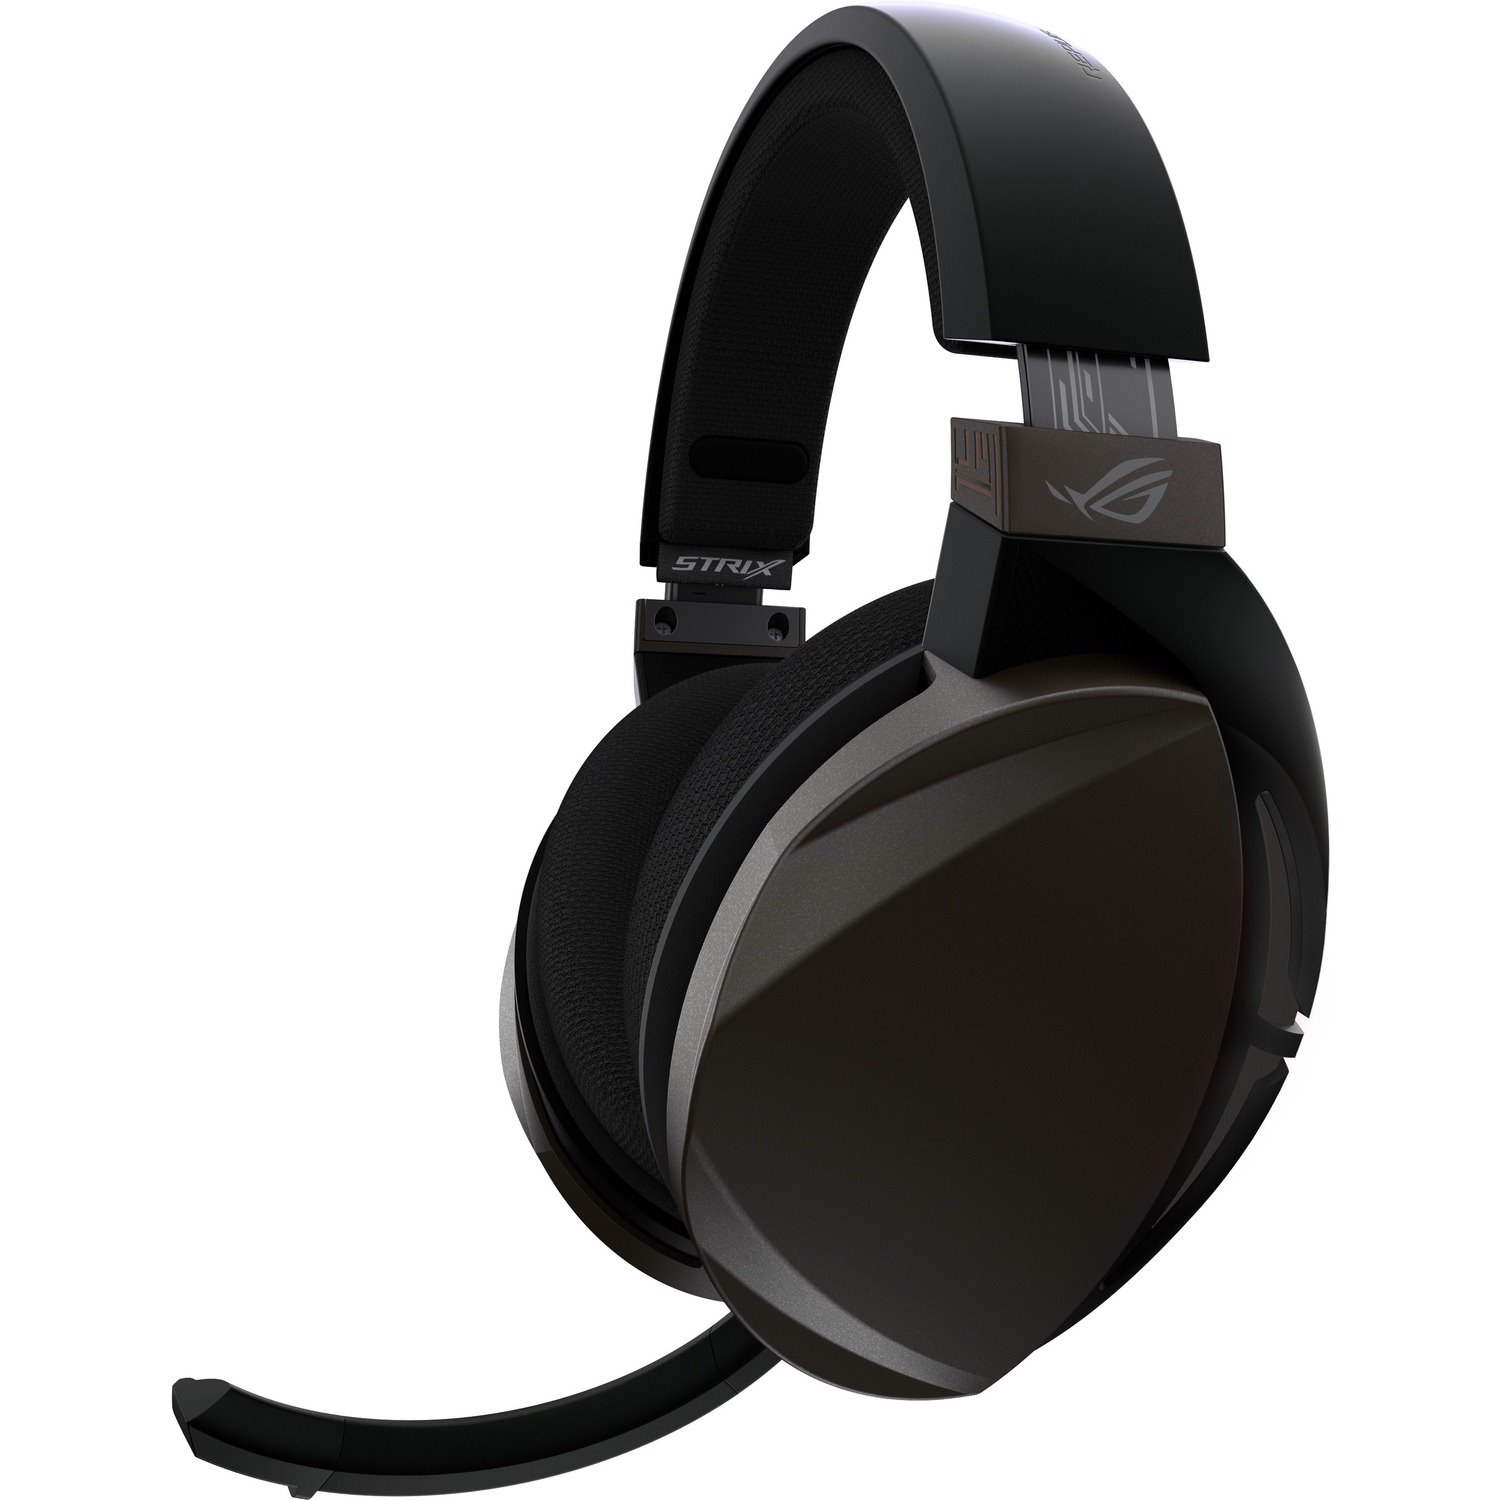 Asus ROG Strix Fusion Wireless Over-the-head Stereo Gaming Headset